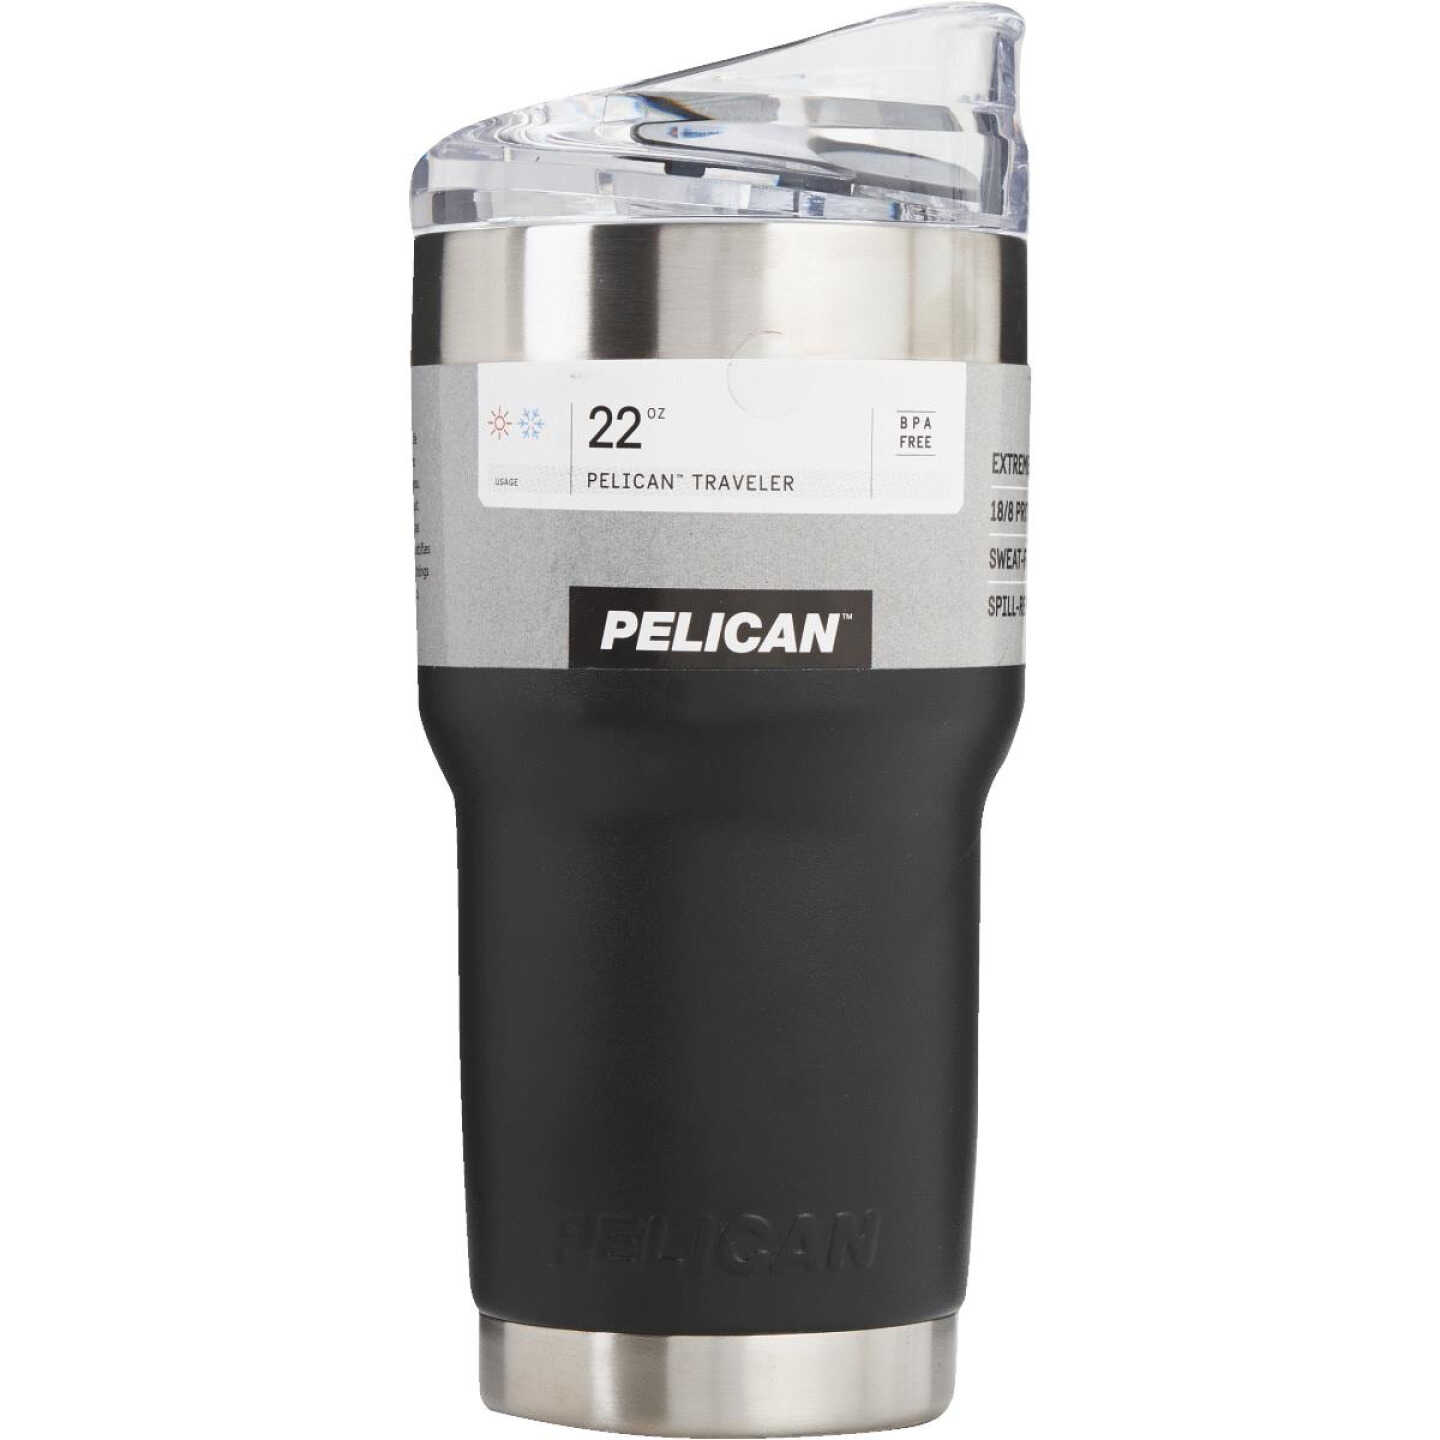 Pelican 22-Ounce Traveler Stainless Steel Tumbler Review 